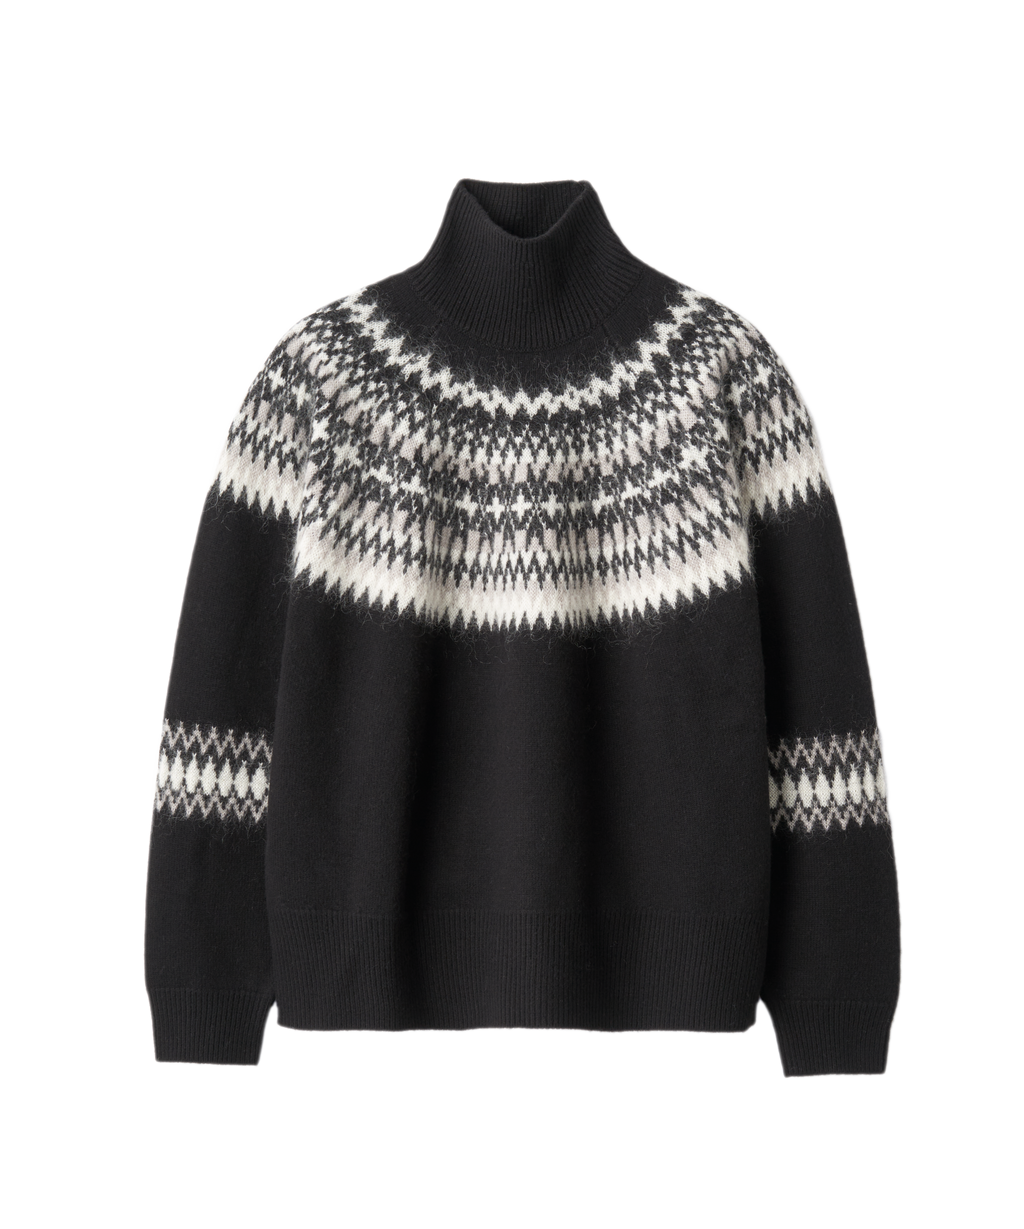 NORDIC TURTLE NECK KNIT – ABYTS